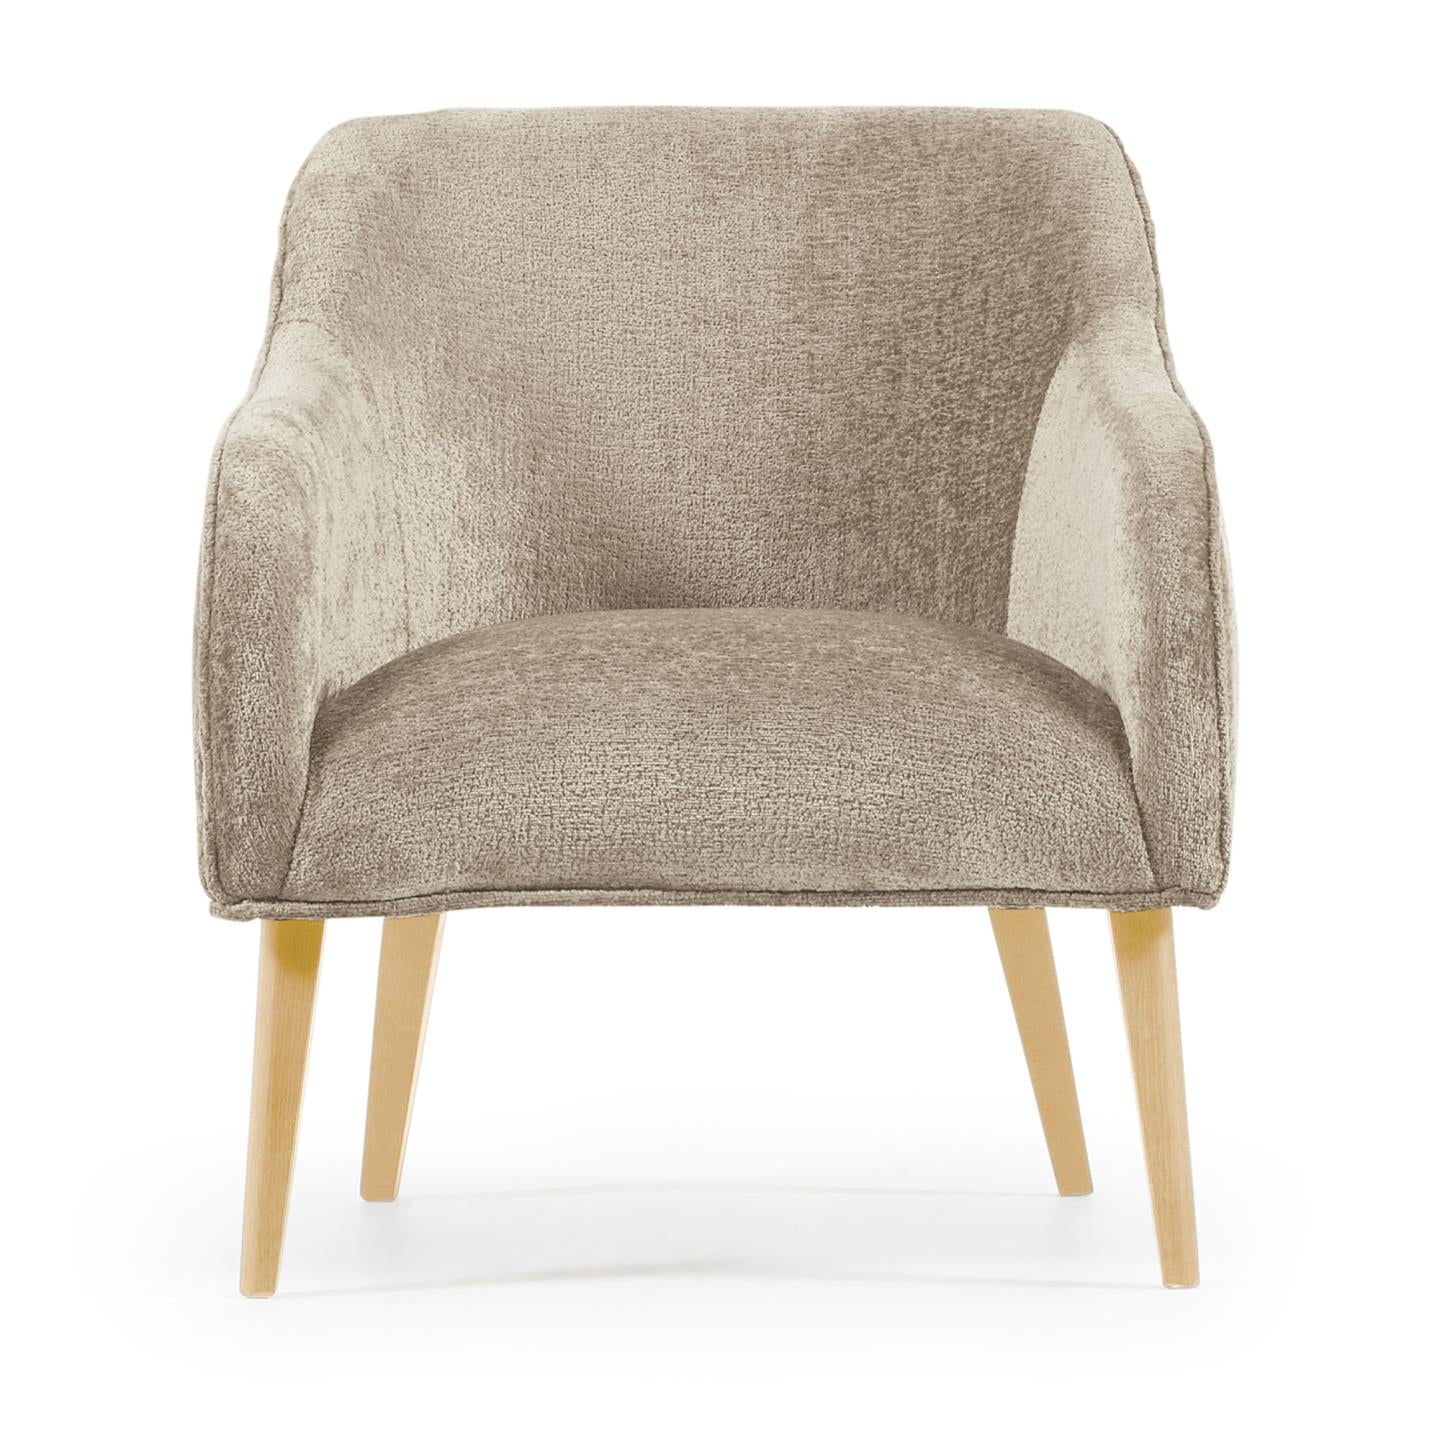 Bobly armchair in beige chenille with wooden legs with natural finish